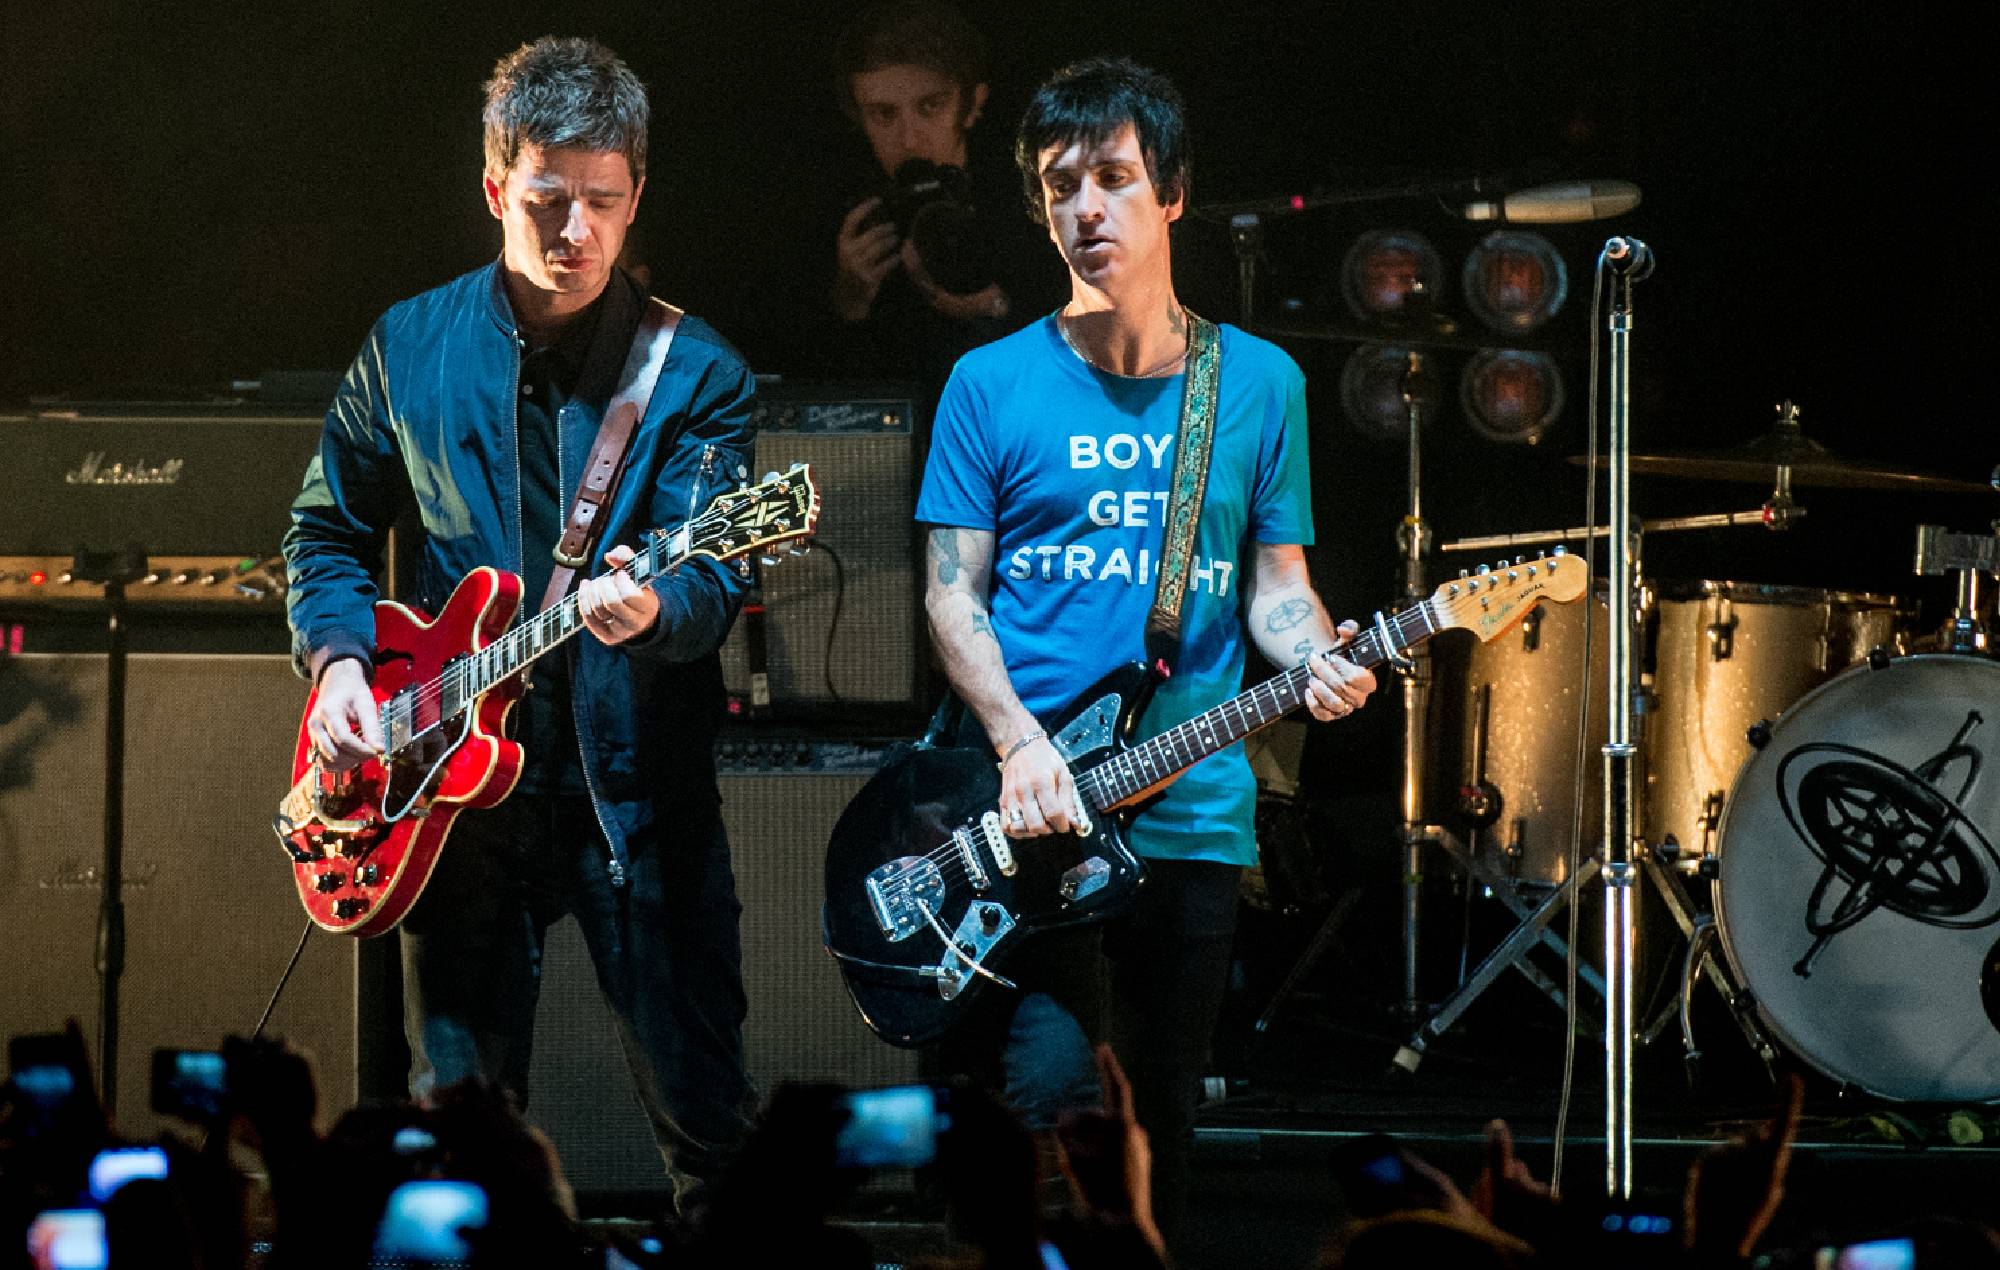 Johnny Marr says he quit drinking after gifting Noel Gallagher with guitar